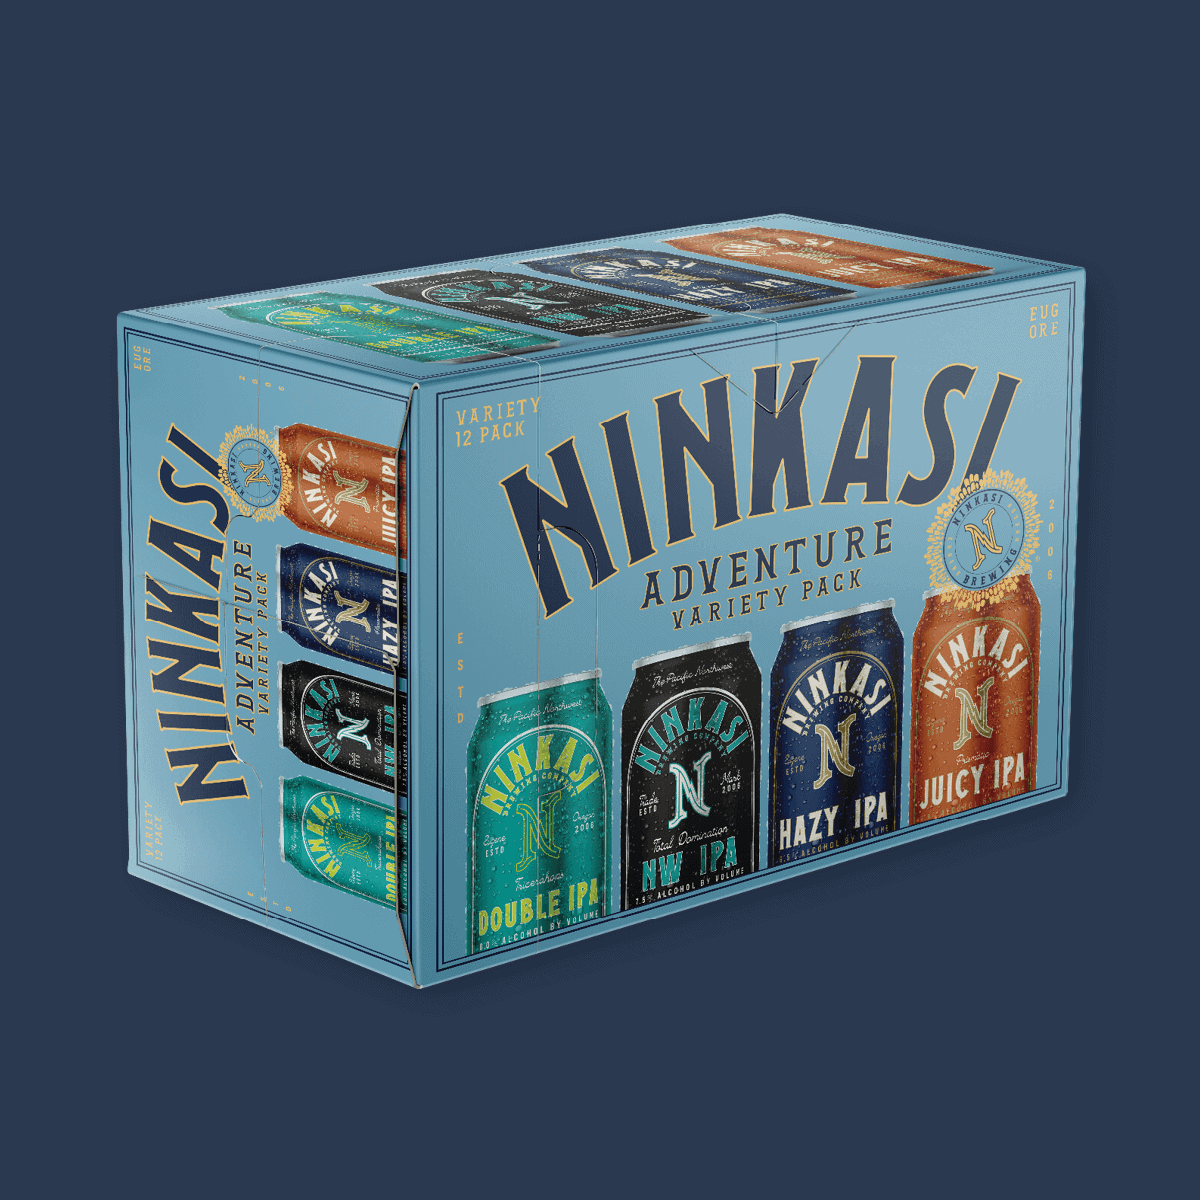 A Ninkasi Brewing Company "Adventure Variety Pack" box in a vibrant blue color. The box showcases images of four different types of beer cans, each with distinct designs and colors. From left to right, the beers are: a green "Double IPA", a turquoise "NW IPA", a blue "Hazy IPA", and an orange "Juicy IPA". The top of the box features multiple beer can designs in a row, suggesting more variety within the pack. Emblazoned prominently on the box is "Variety 12 Pack" and the Ninkasi logo with the establishment date "Est. 2006". The background is a muted navy blue.